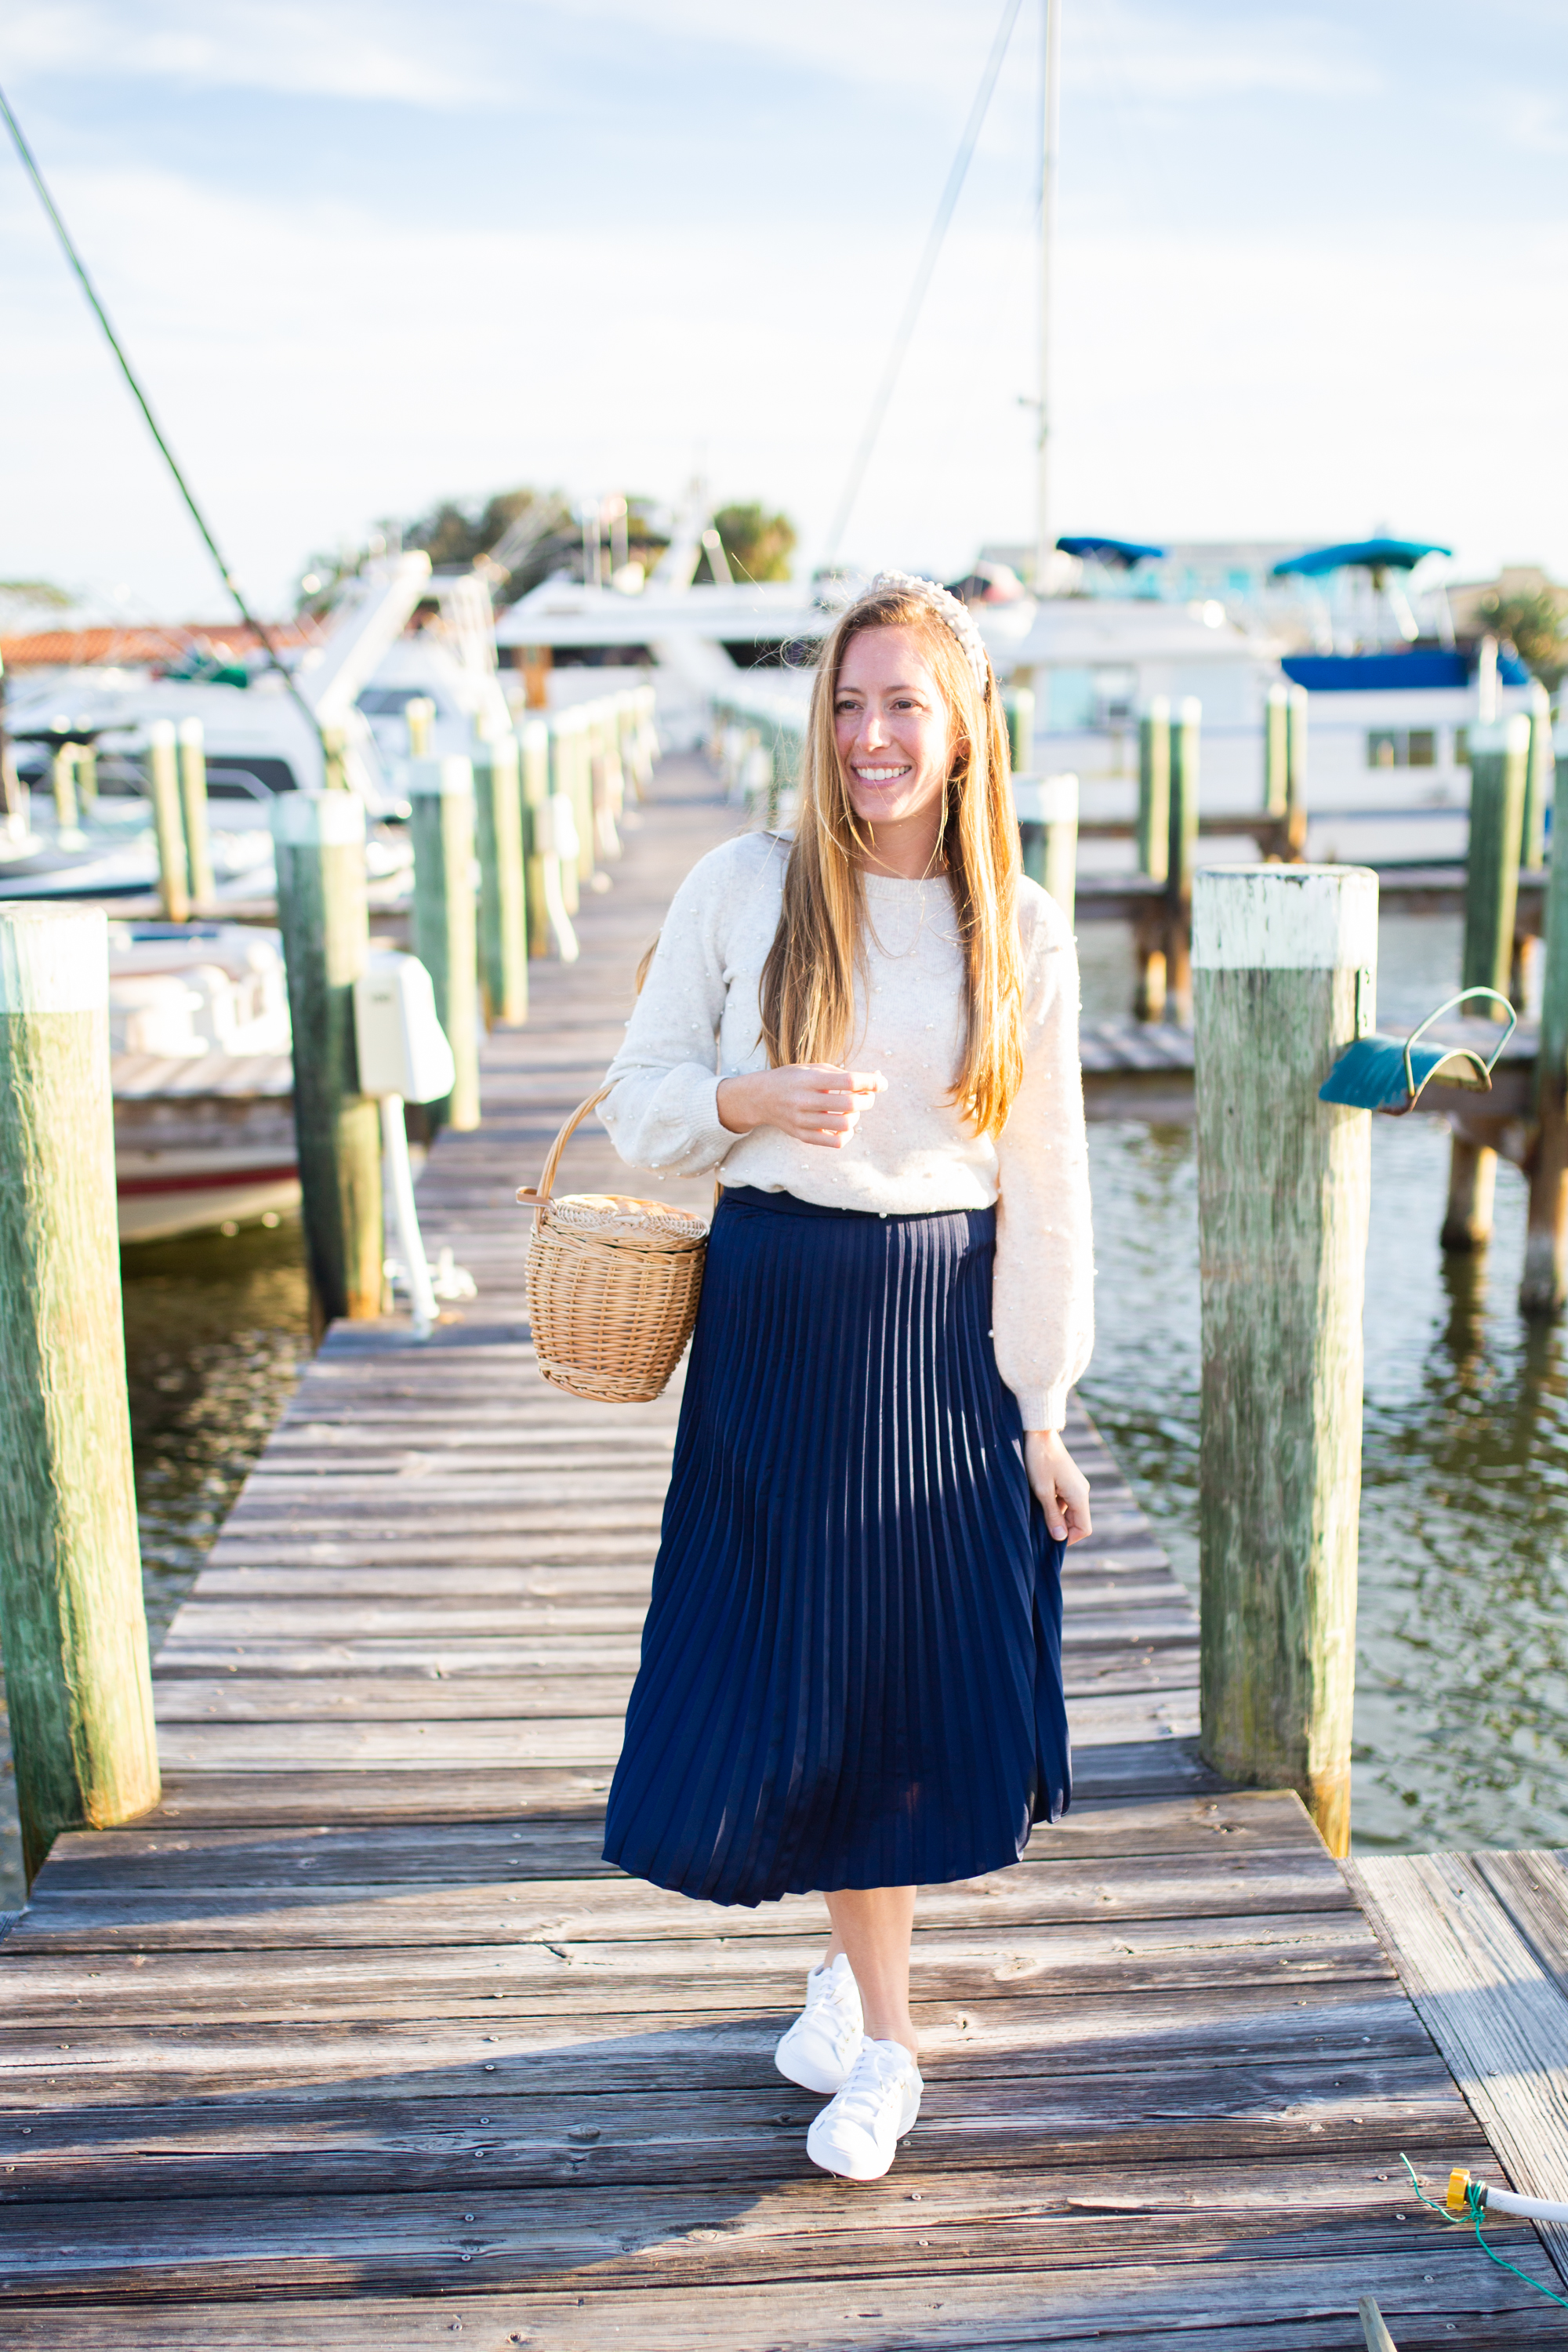 Cozy Sweaters / Puff Sleeve Sweater / How to Style a Sweater / Pleated Skirt / How to Wear White Sneakers / Winter Outfit / Spring Outfit - Sunshine Style, a Florida Fashion Blog by Katie 